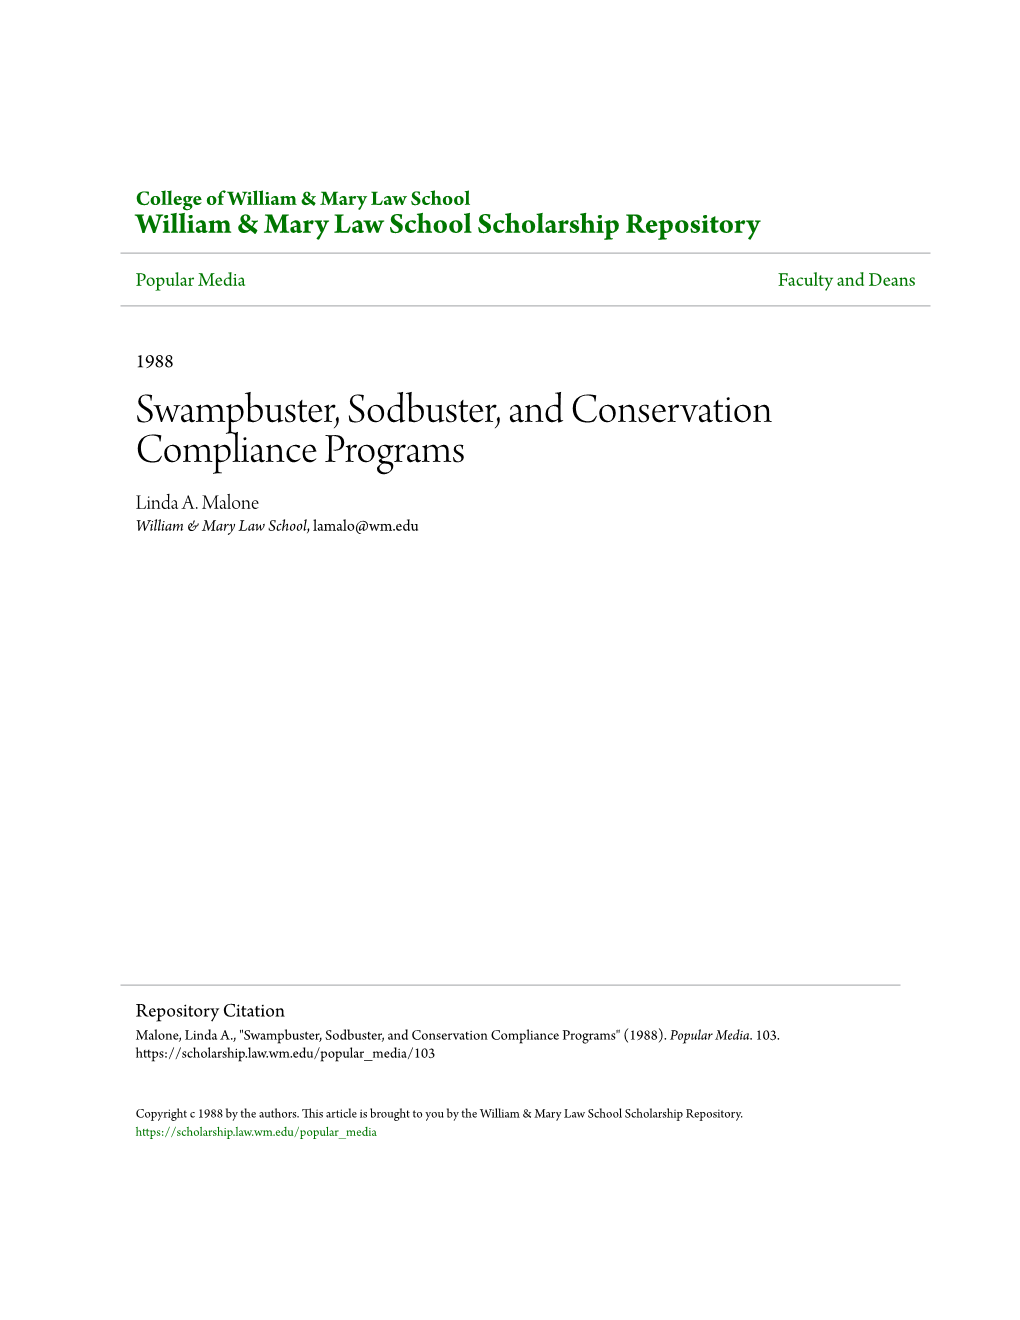 Swampbuster, Sodbuster, and Conservation Compliance Programs Linda A